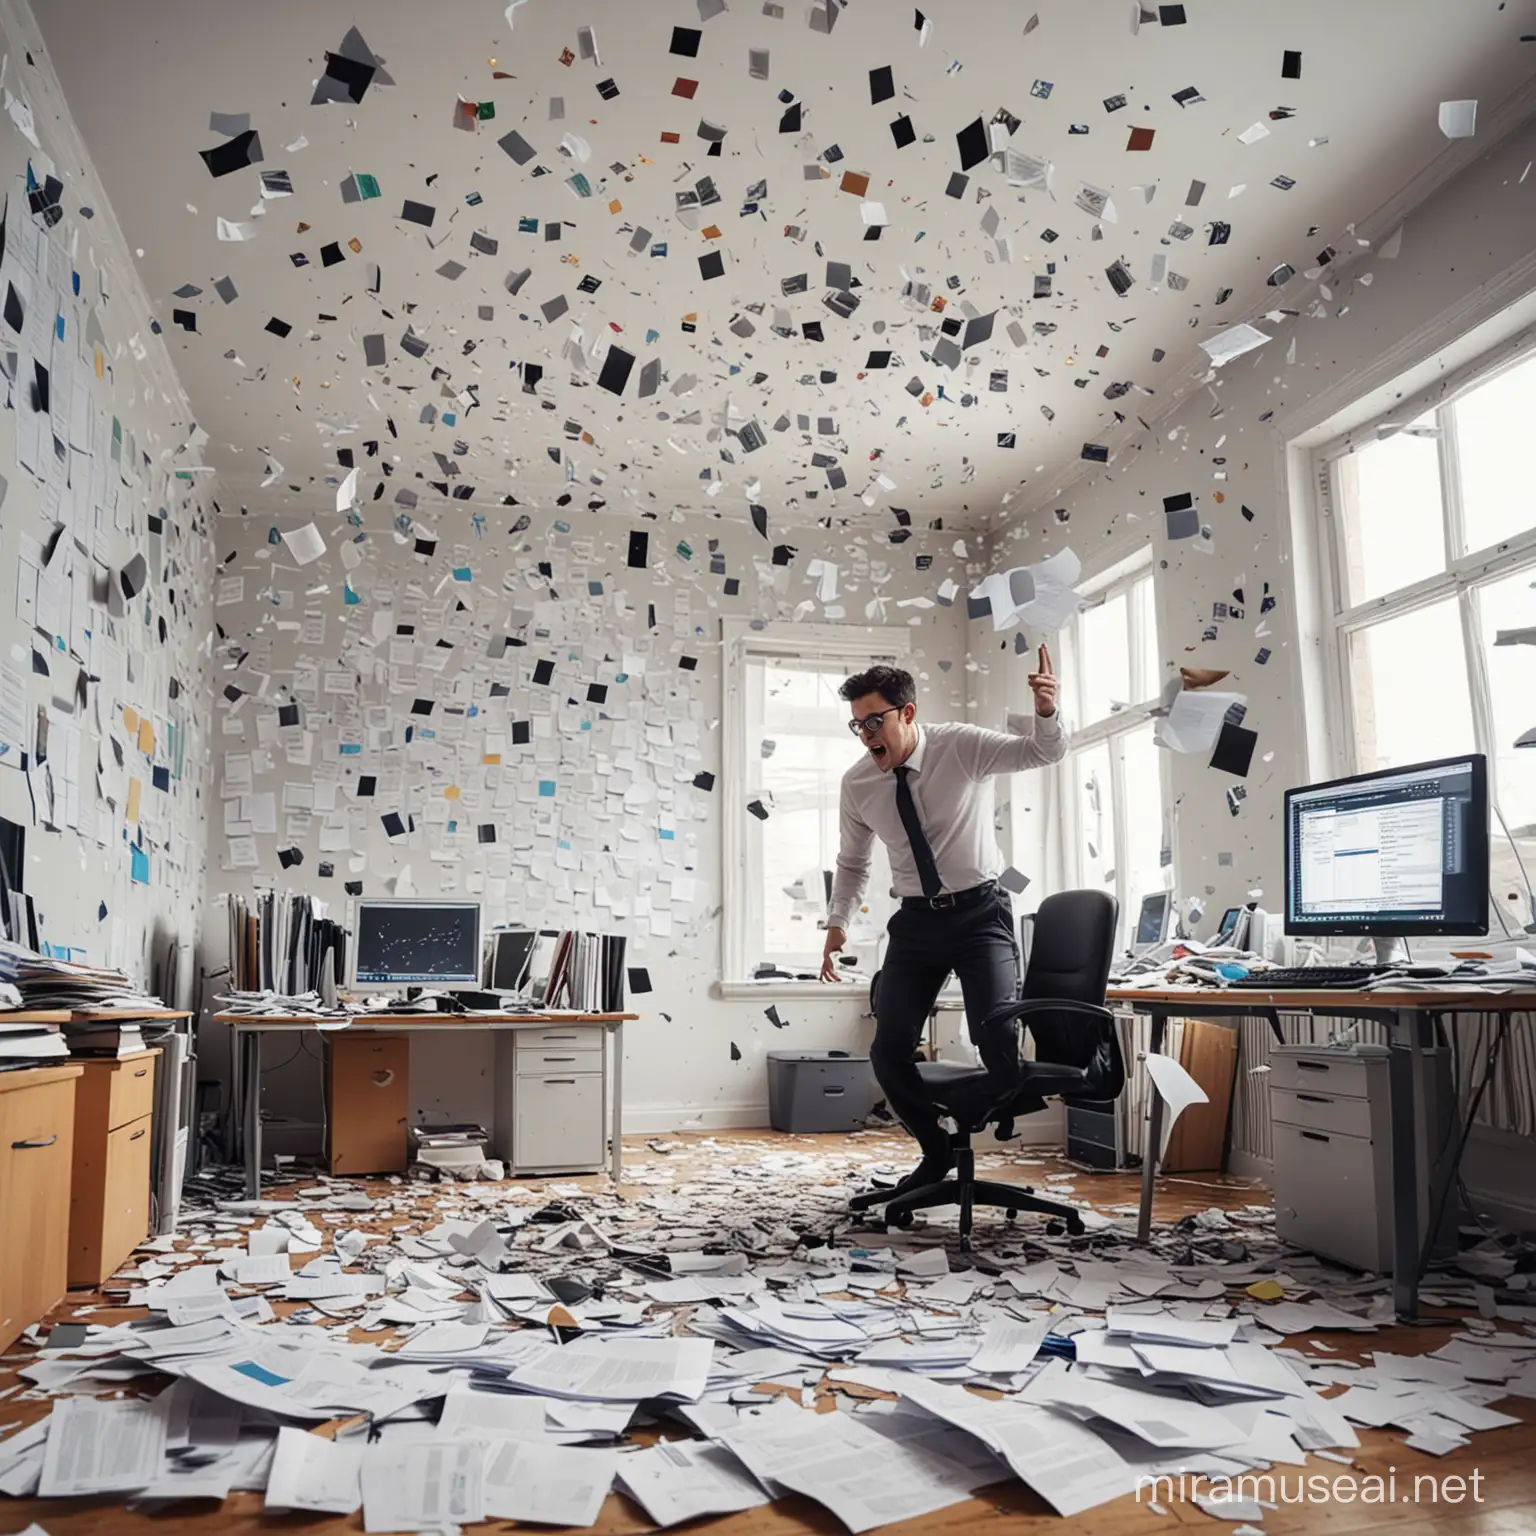 Office Worker Navigating Through a Chaos of Flying Documents and Computers